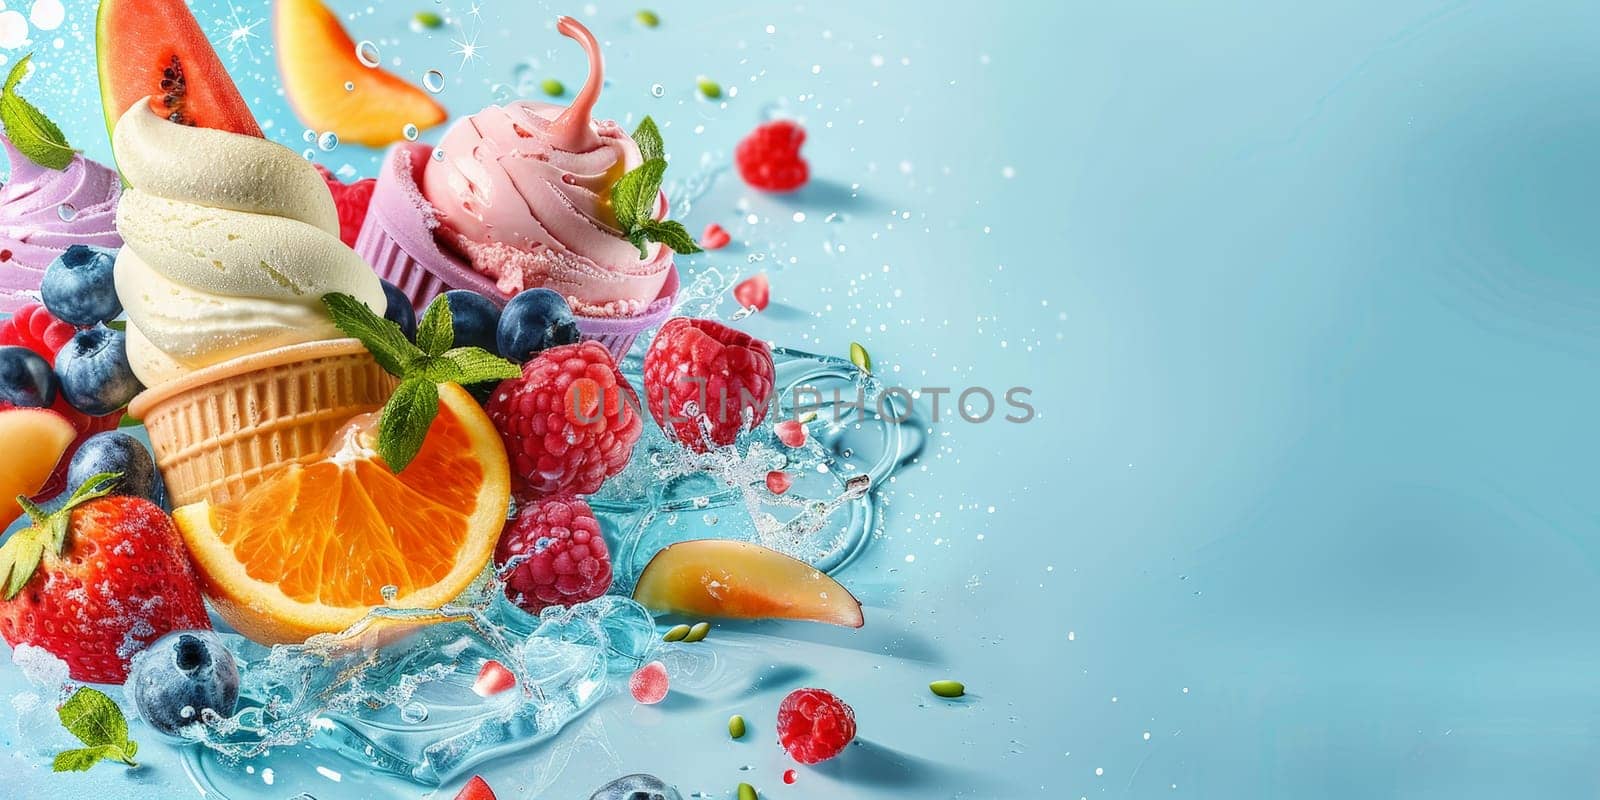 A blue background with a blue and white ice cream cone with a blue and white swirl on it. The cone is surrounded by a variety of fruits including oranges, blueberries, and raspberries